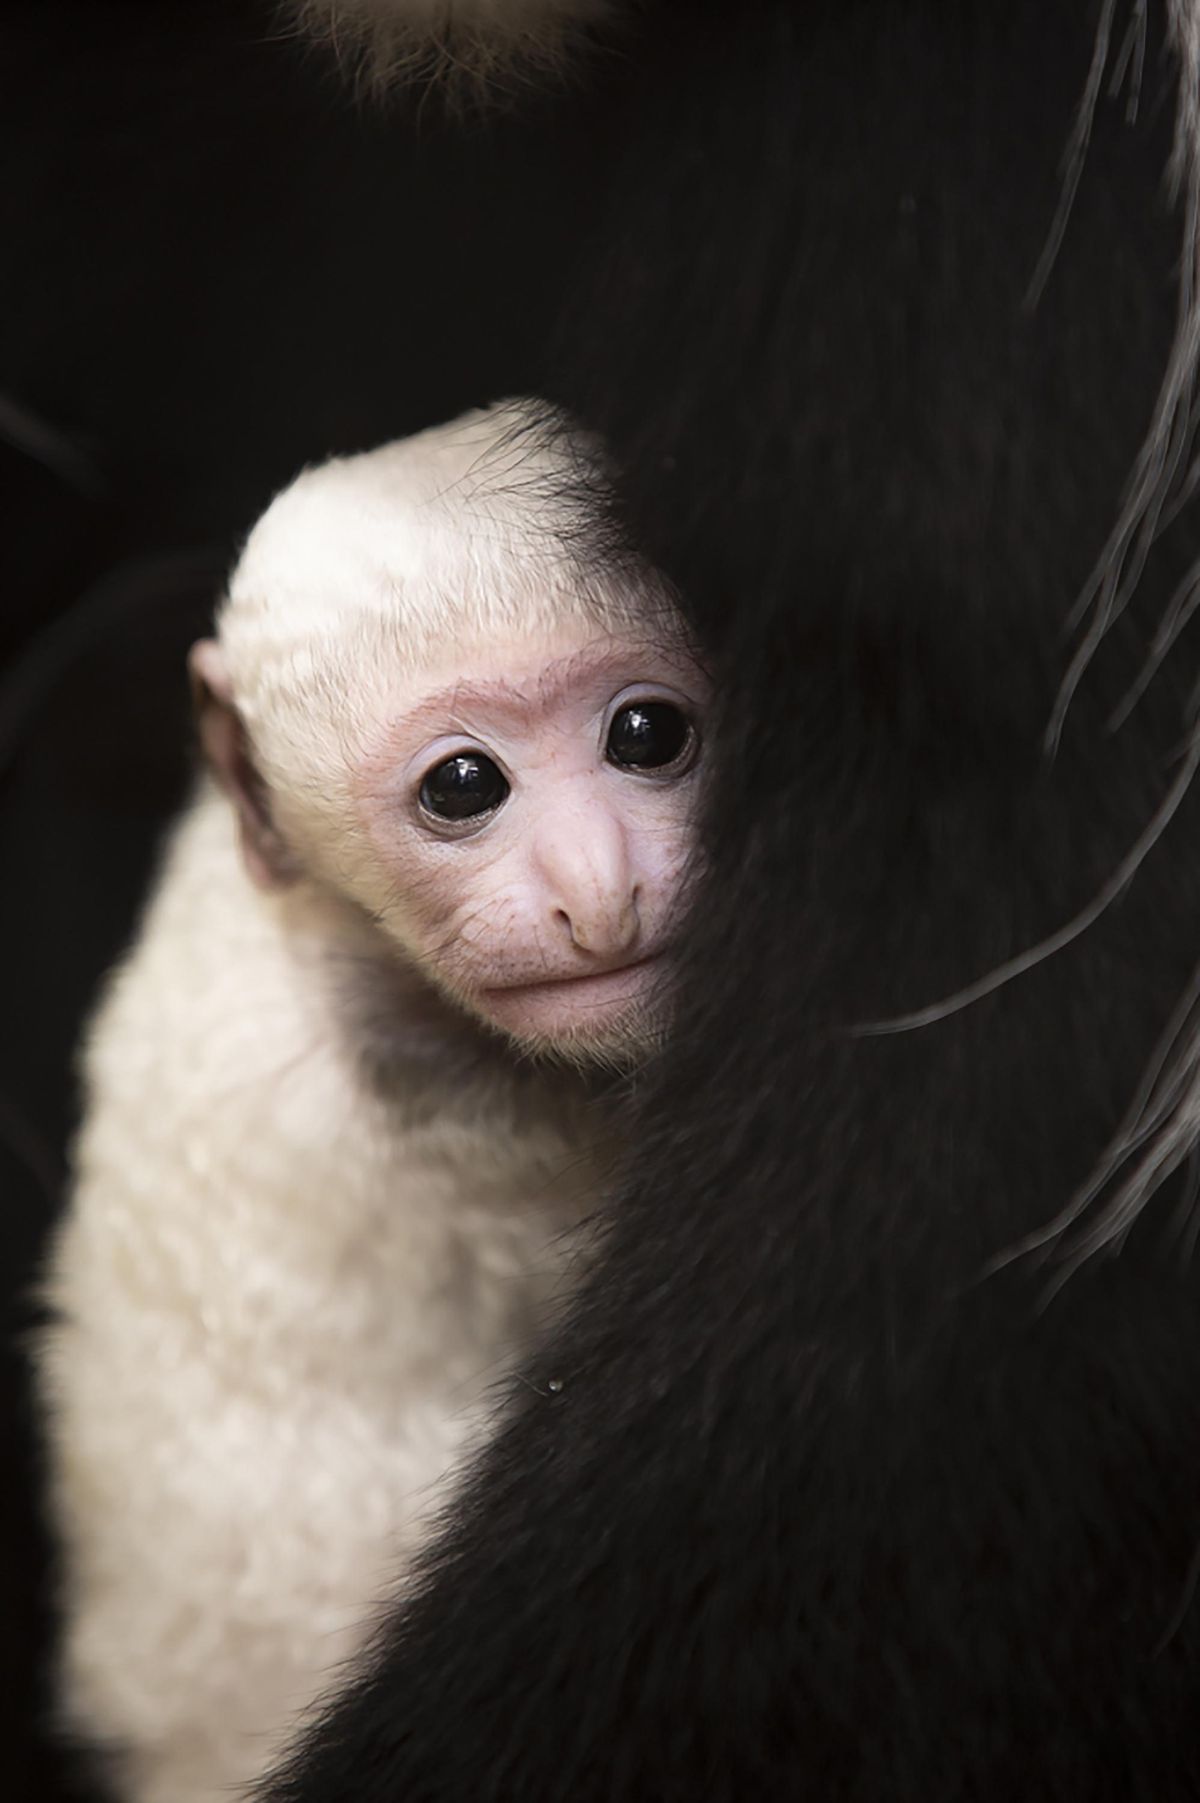 This undated photo provided by the St. Louis Zoo on Thursday, Feb. 20, 2020, Binti, a black and white colobus monkey holds her newborn brother Teak, born Feb. 3 at the zoo. The baby colobus monkey is born with all-white hair and a pink face reaching adult coloration, with black hair and white hair around the face and part of their tails, around 6 months of age. (Ethan Riepl / Associated Press)